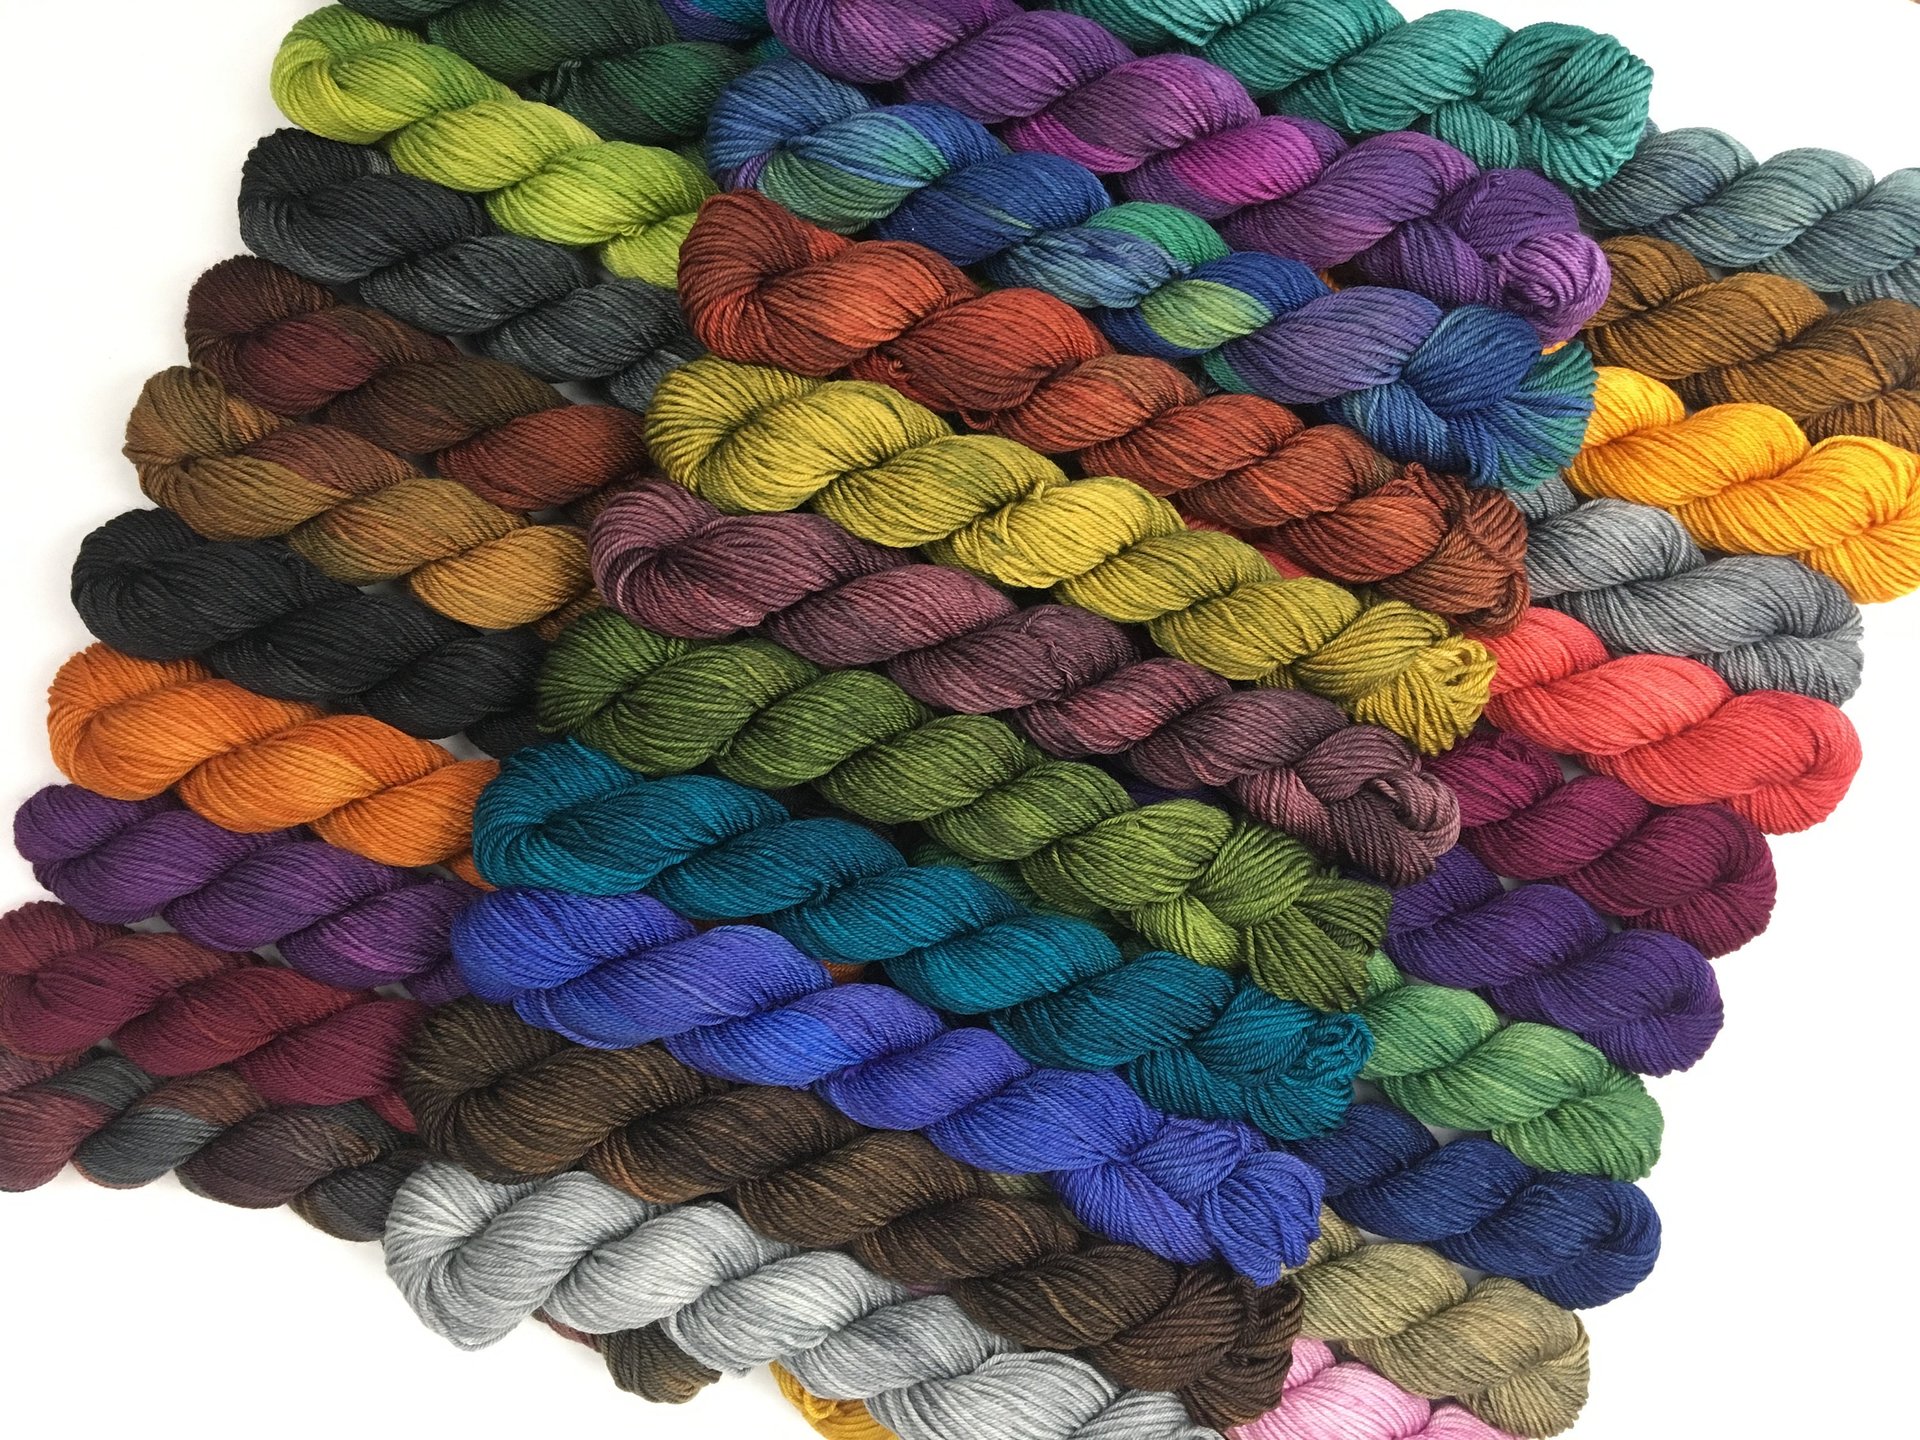 The Ultimate Mini Skein Set - Hand Dyed Yarn, Fingering Weight 4 Ply Superwash Merino Wool, Hand Dyed Sock Yarn, 35 Mini Skeins in 35 Colors